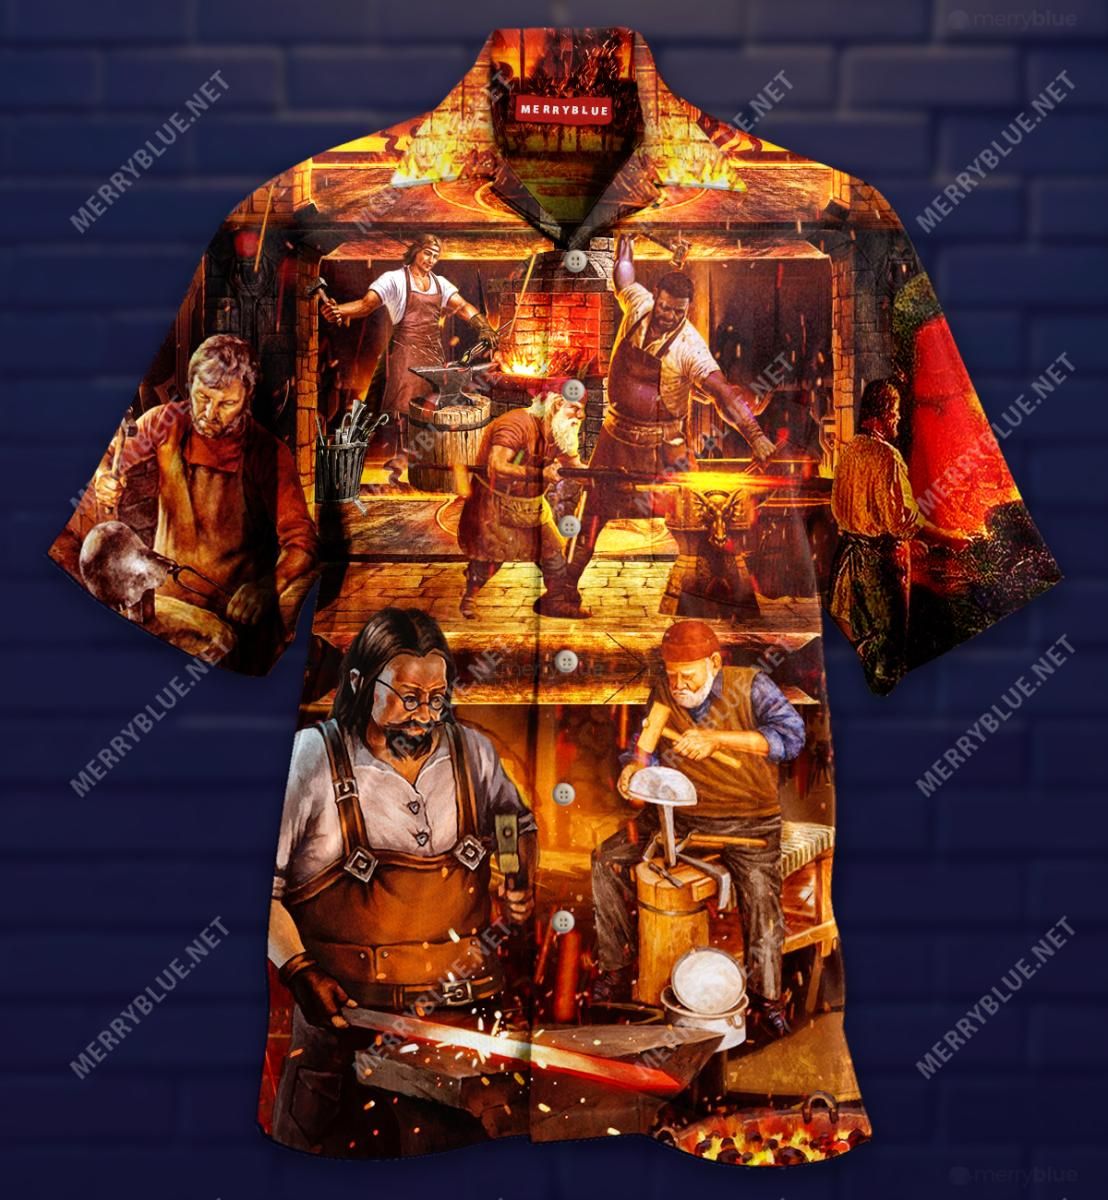 its not a hobby its a postapocalyptic life skill aloha hawaiian shirt colorful short sleeve summer beach casual shirt for men and women timpd